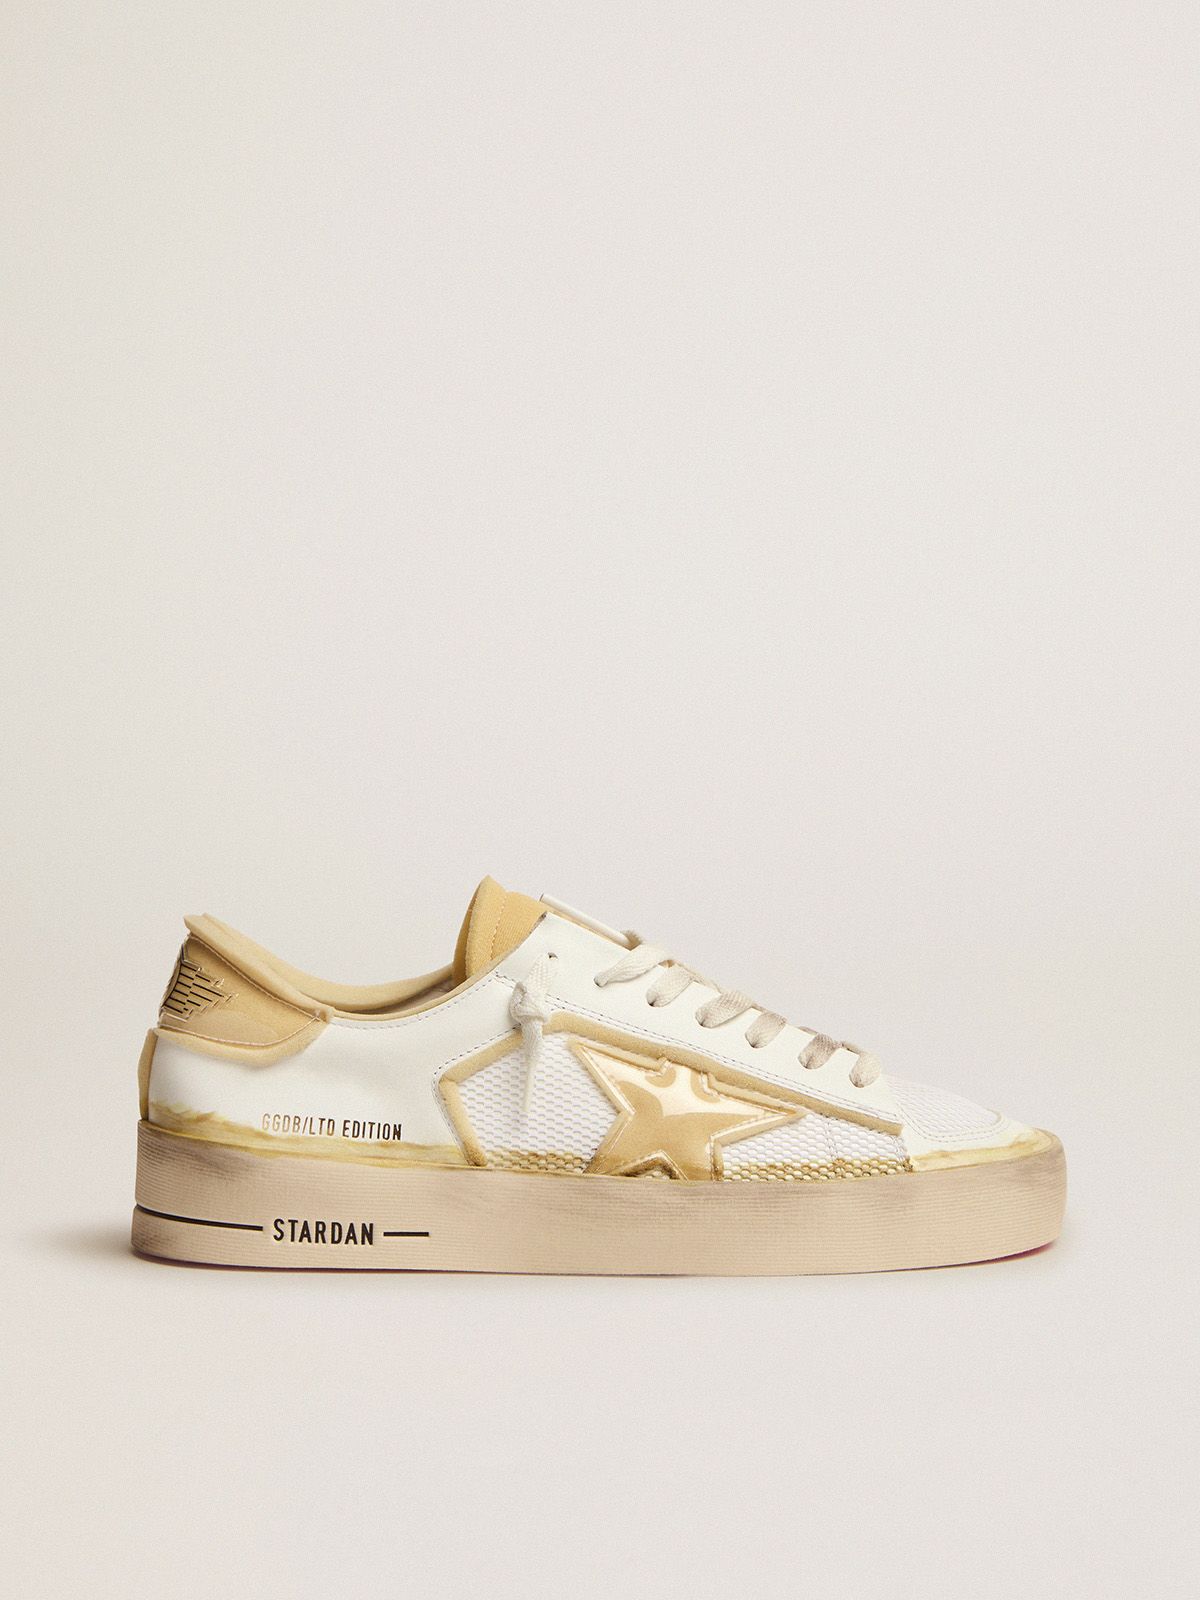 Golden Goose Saldi Uomo Stardan LAB sneakers in white leather with foam and PVC inserts